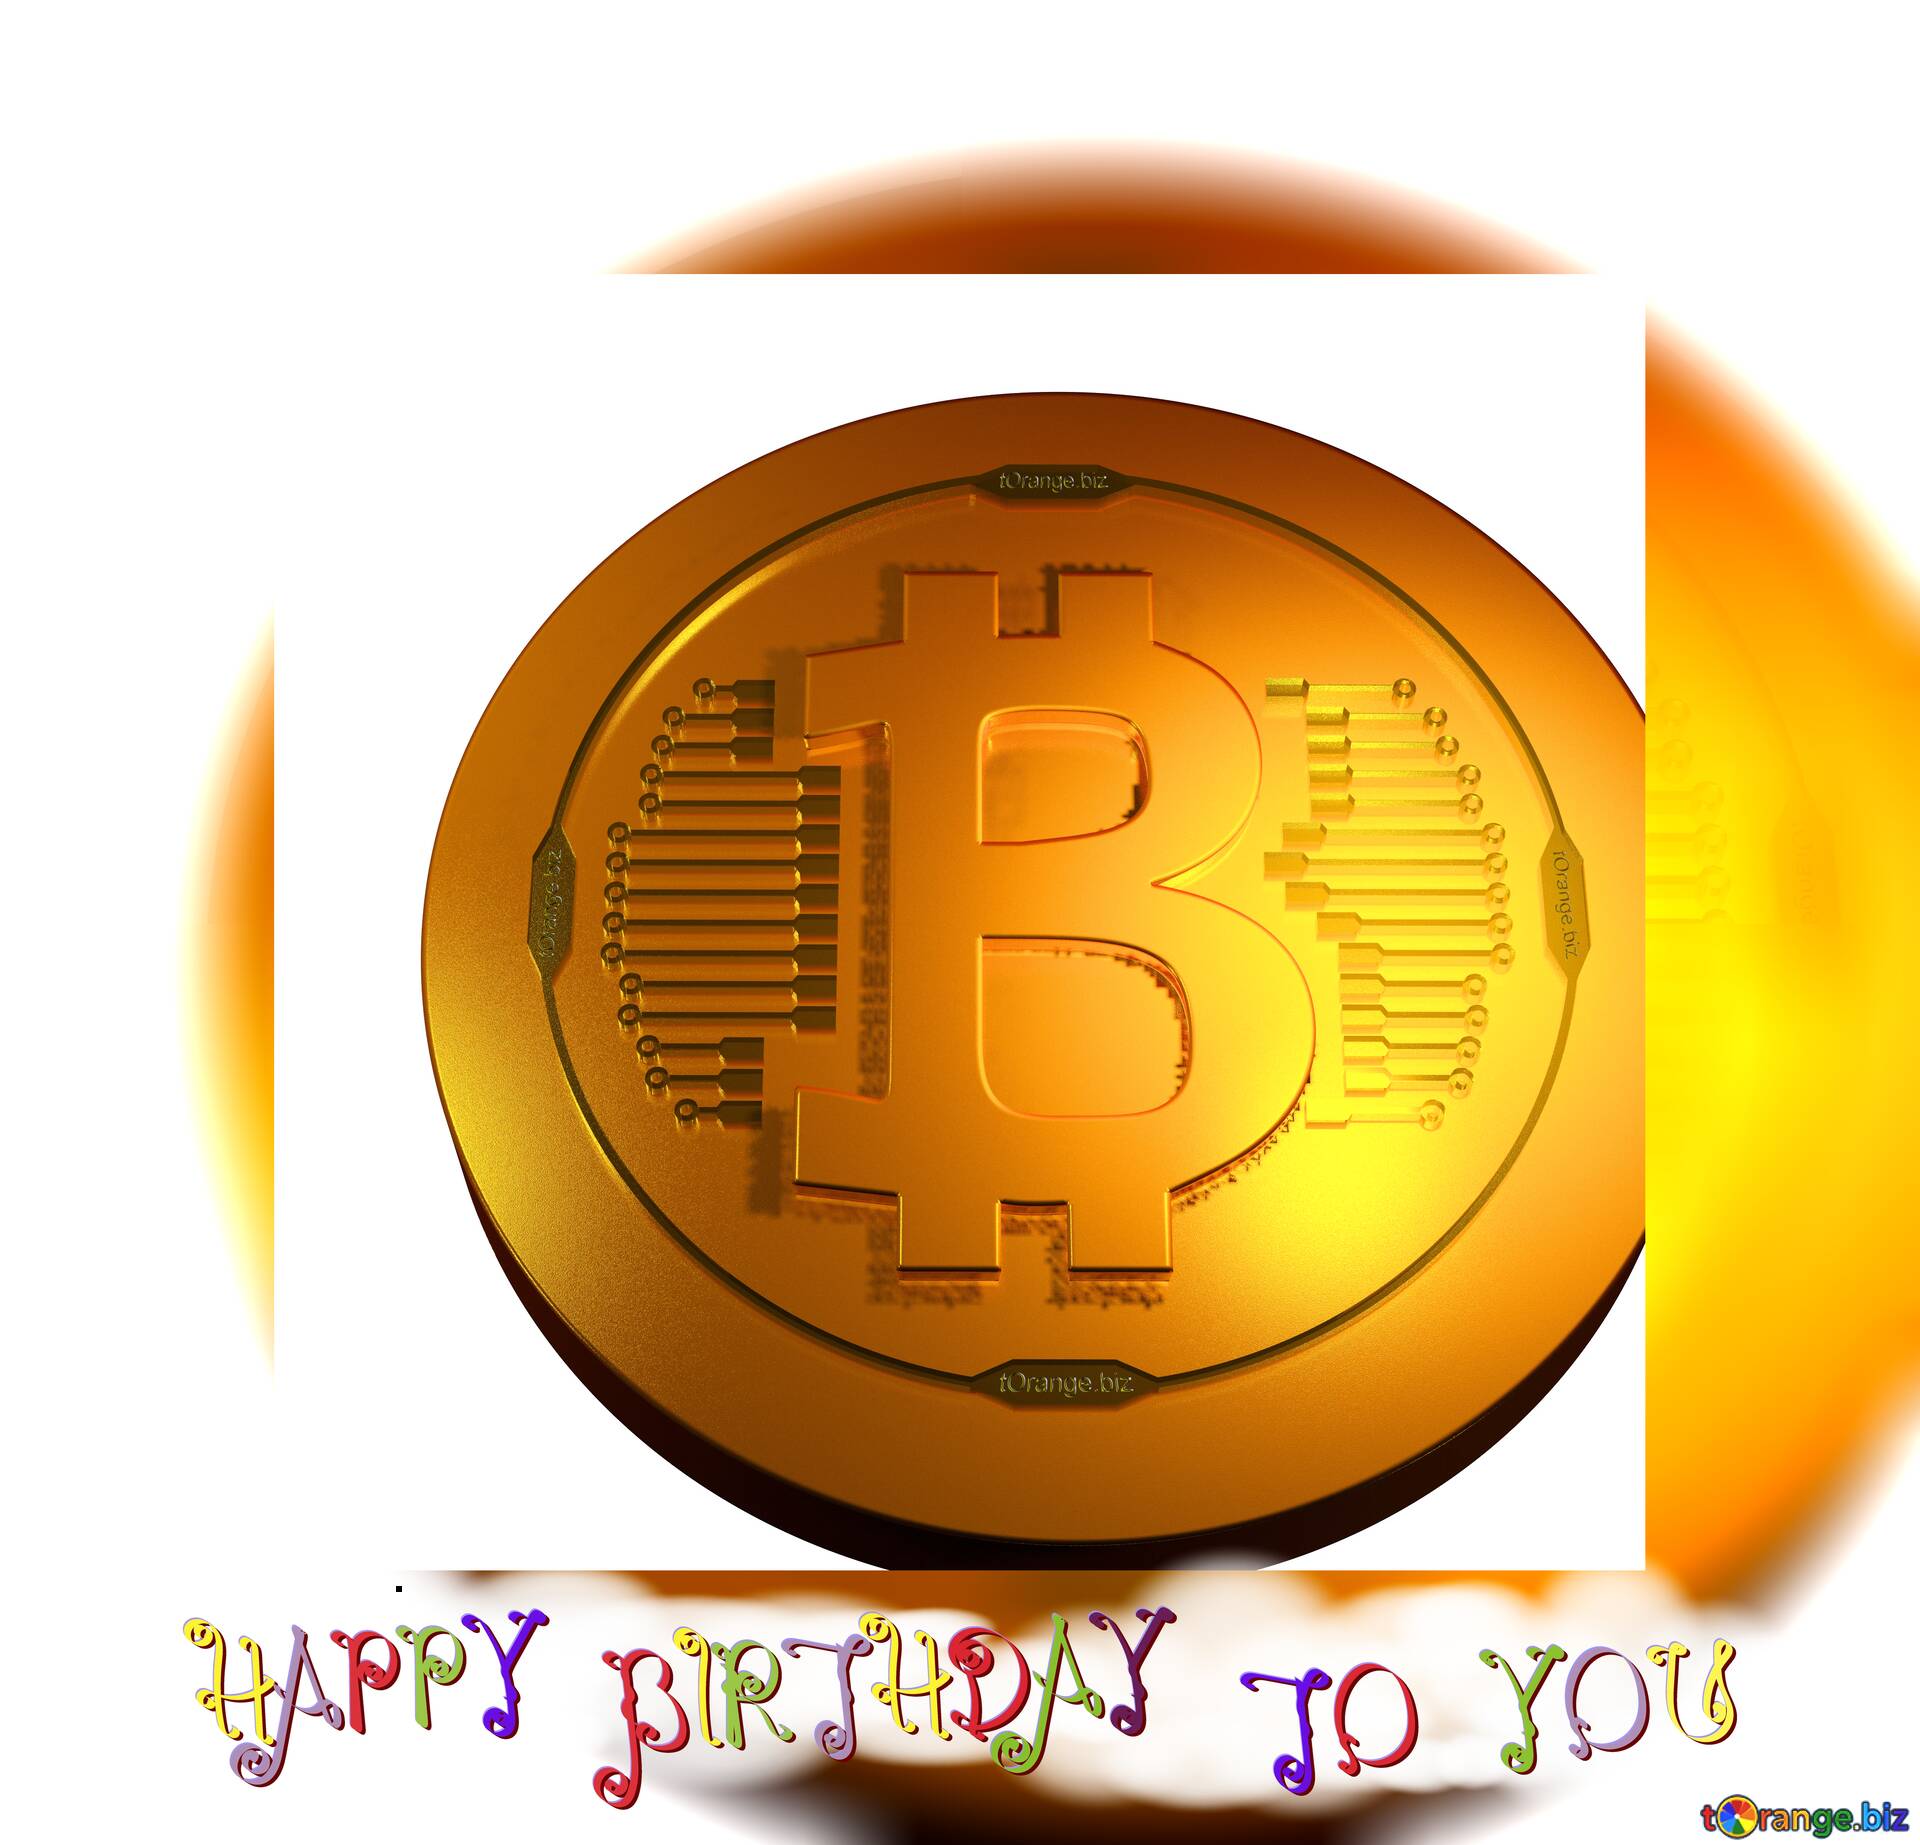 Bitcoin White Paper Turns 15: A Continuation Of Satoshi Nakamoto’s Legacy